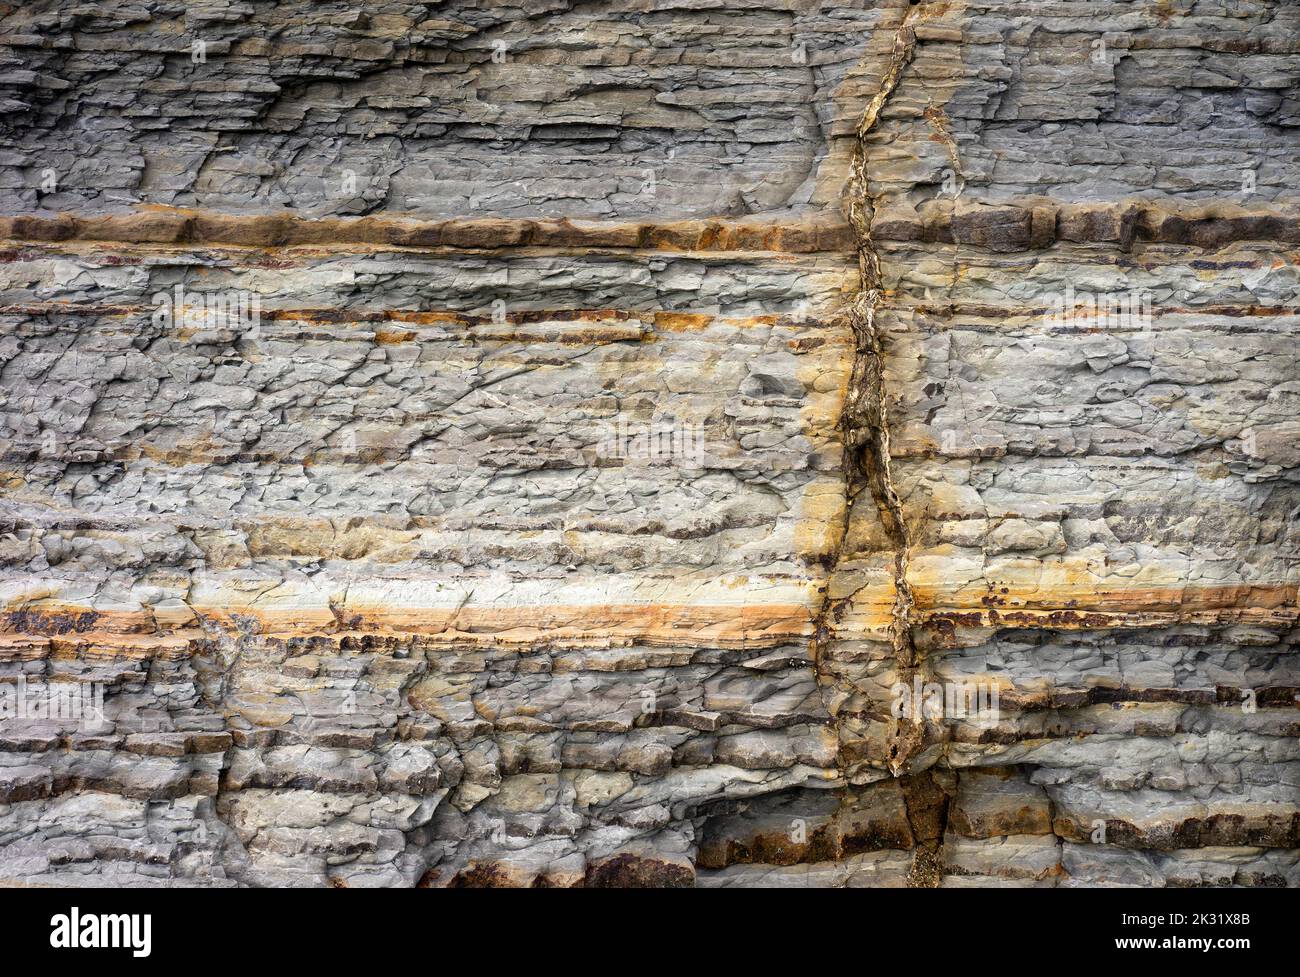 Vertical vein of a mineral deposit exposed in rocks. Stock Photo